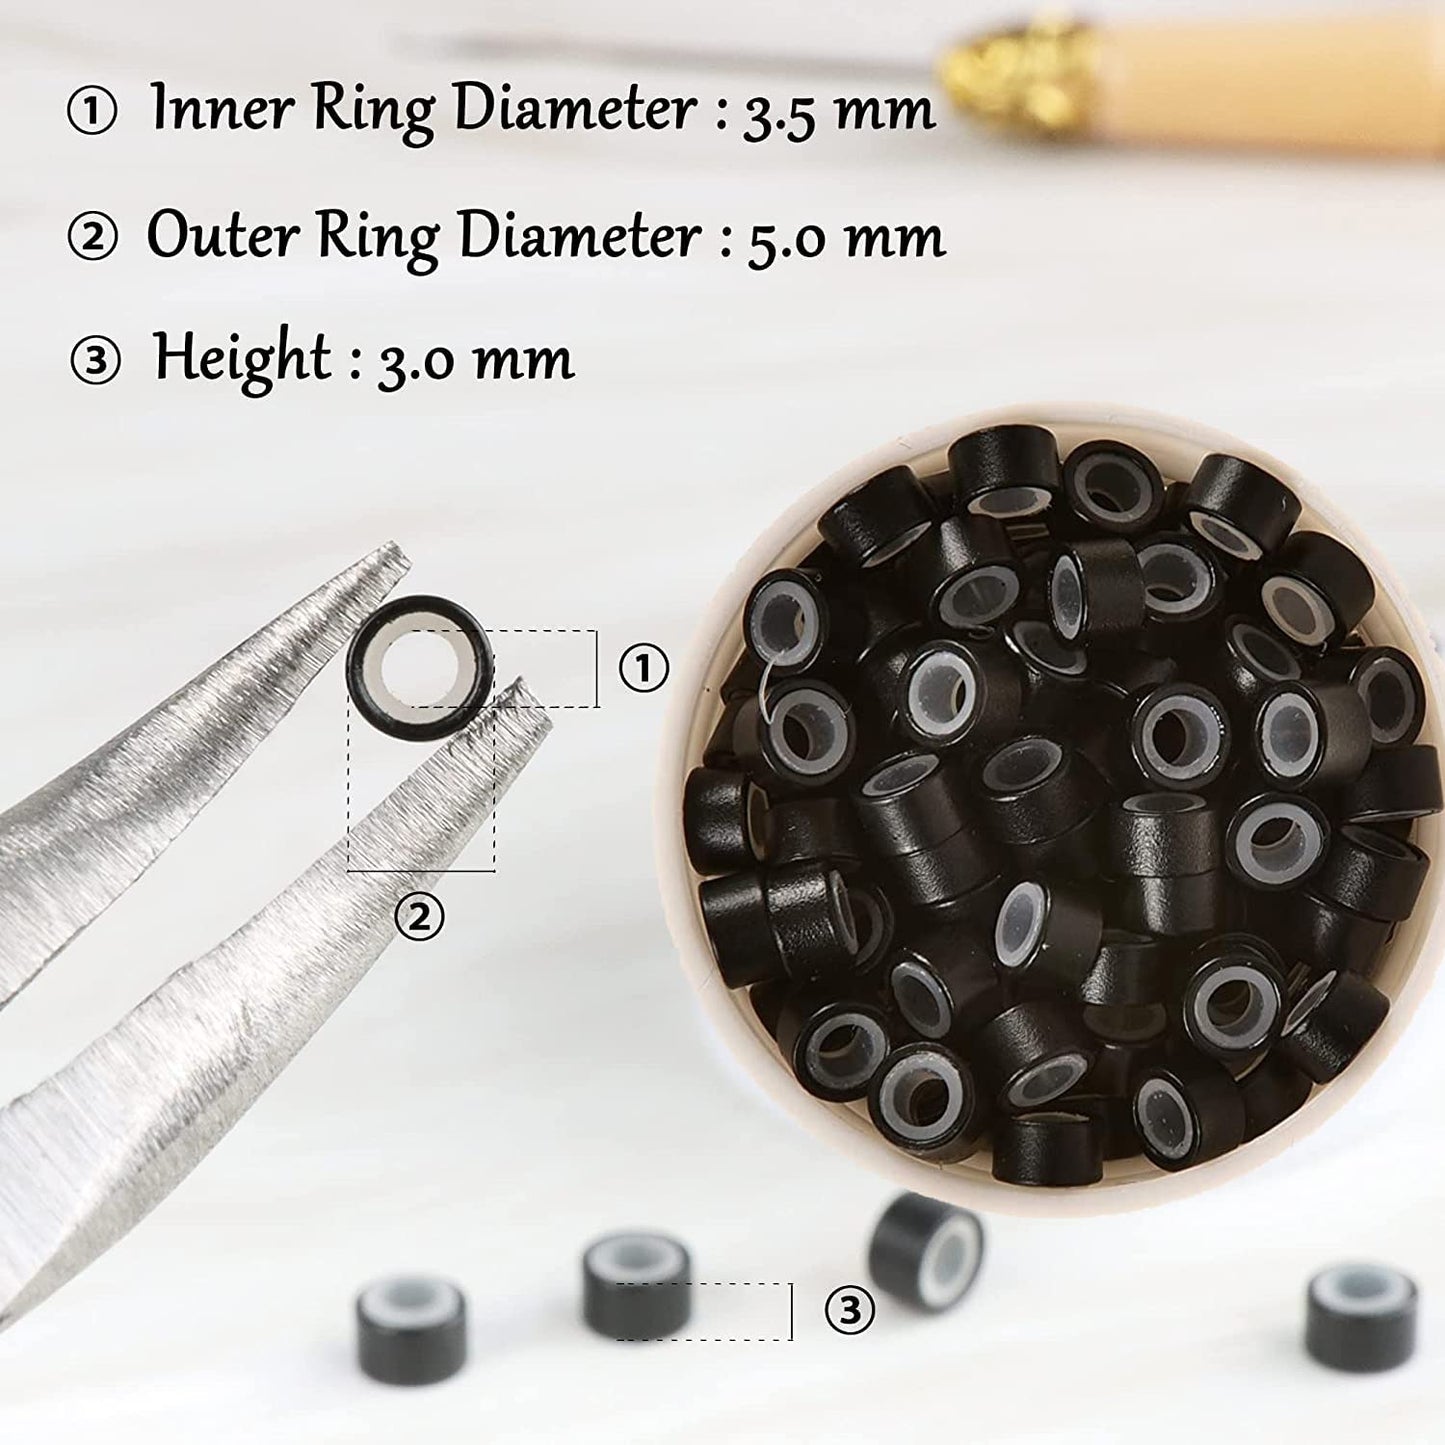 Micro Link Beads 5mm for Hair Extensions - 500 Silicone Lined Beads for Human Micro Link Rings Silicone Hair Extensions Tool(Dark brown)